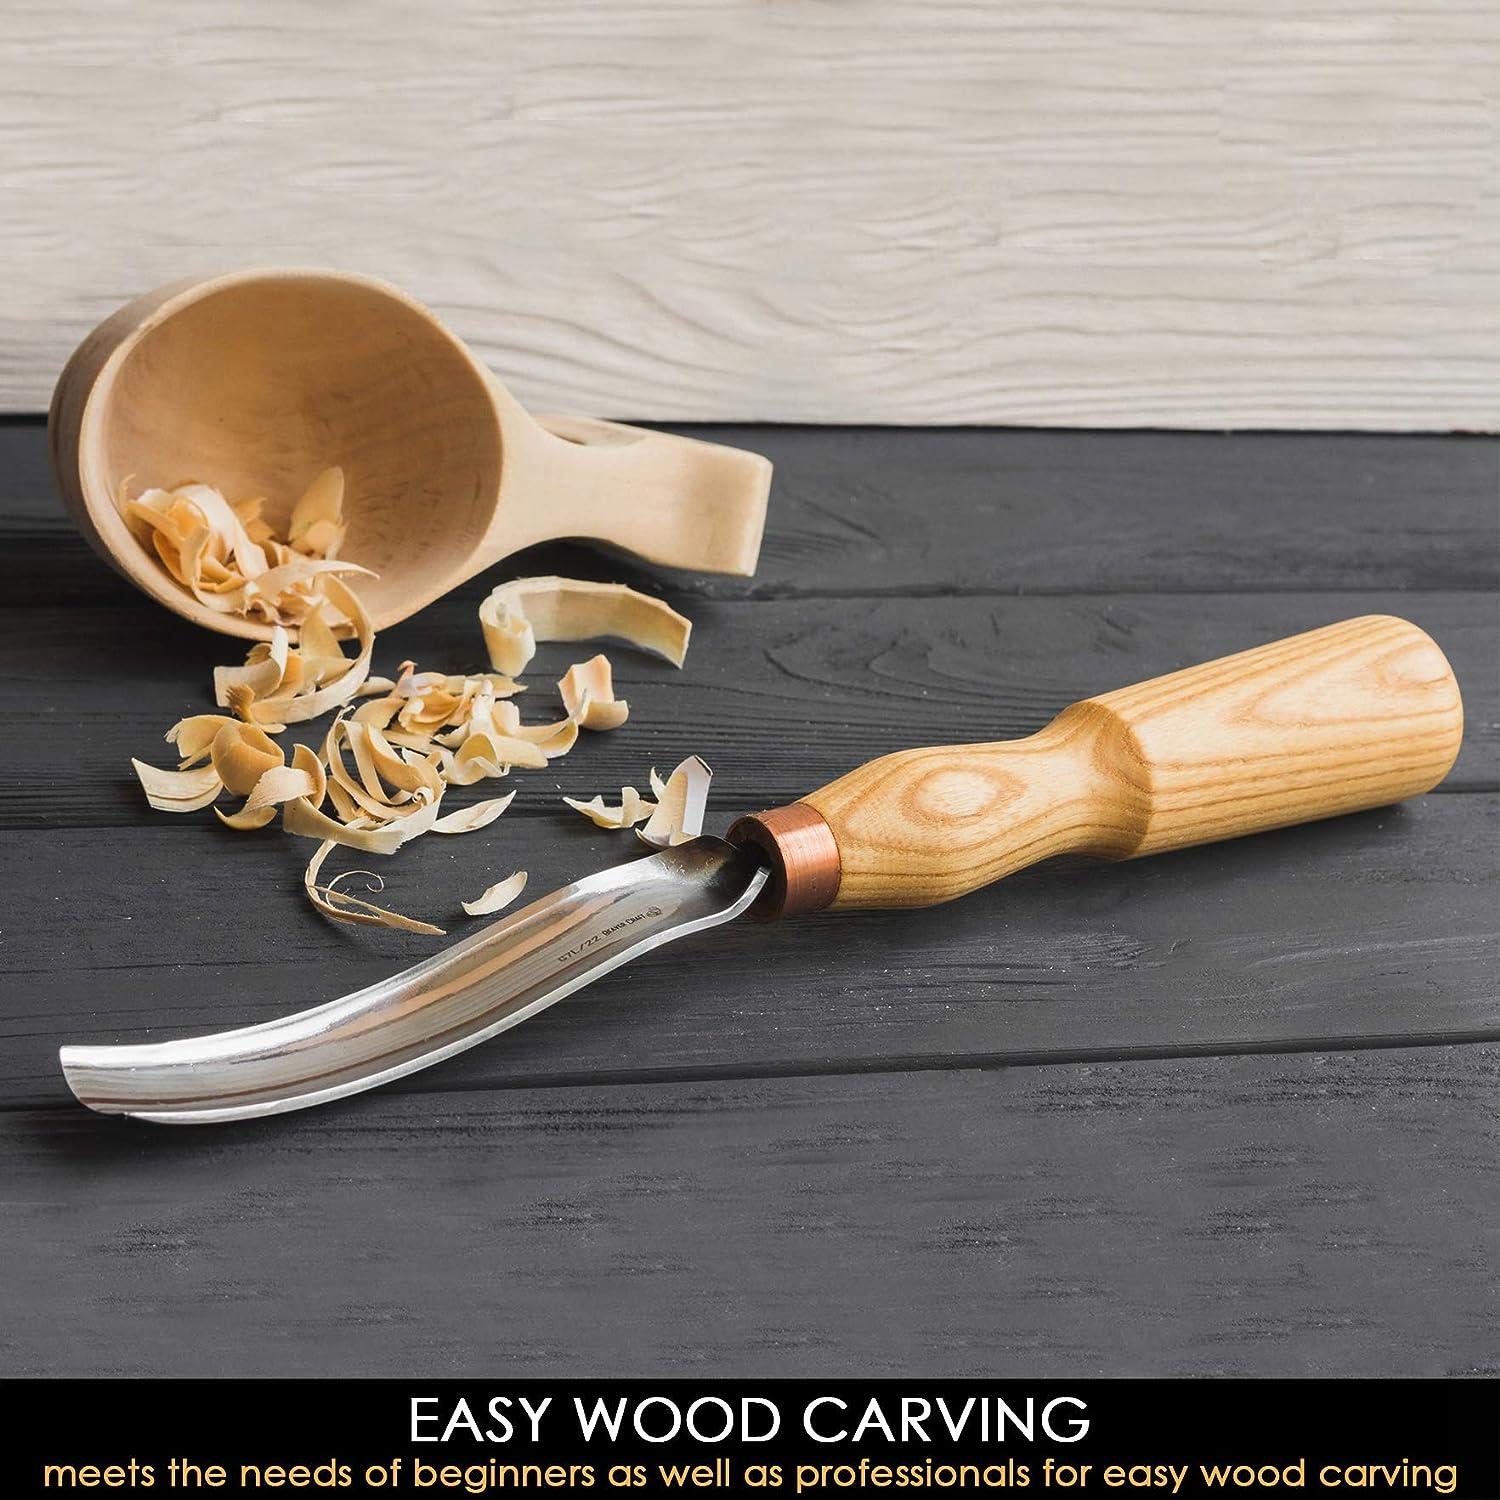 Spoon carving set 5 pcs. Forged chisel. Spoon carving tools. Wood